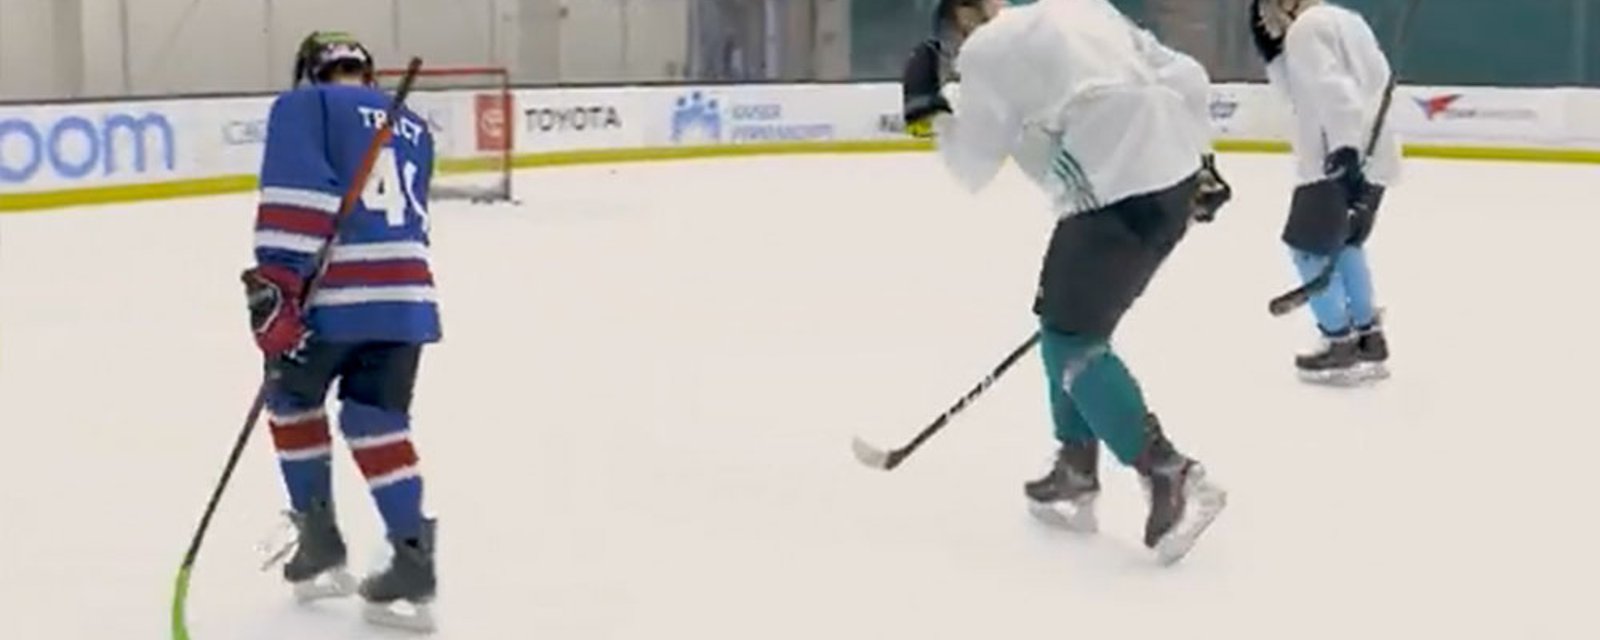 Moonwalk kid teaches Sharks players how to celly